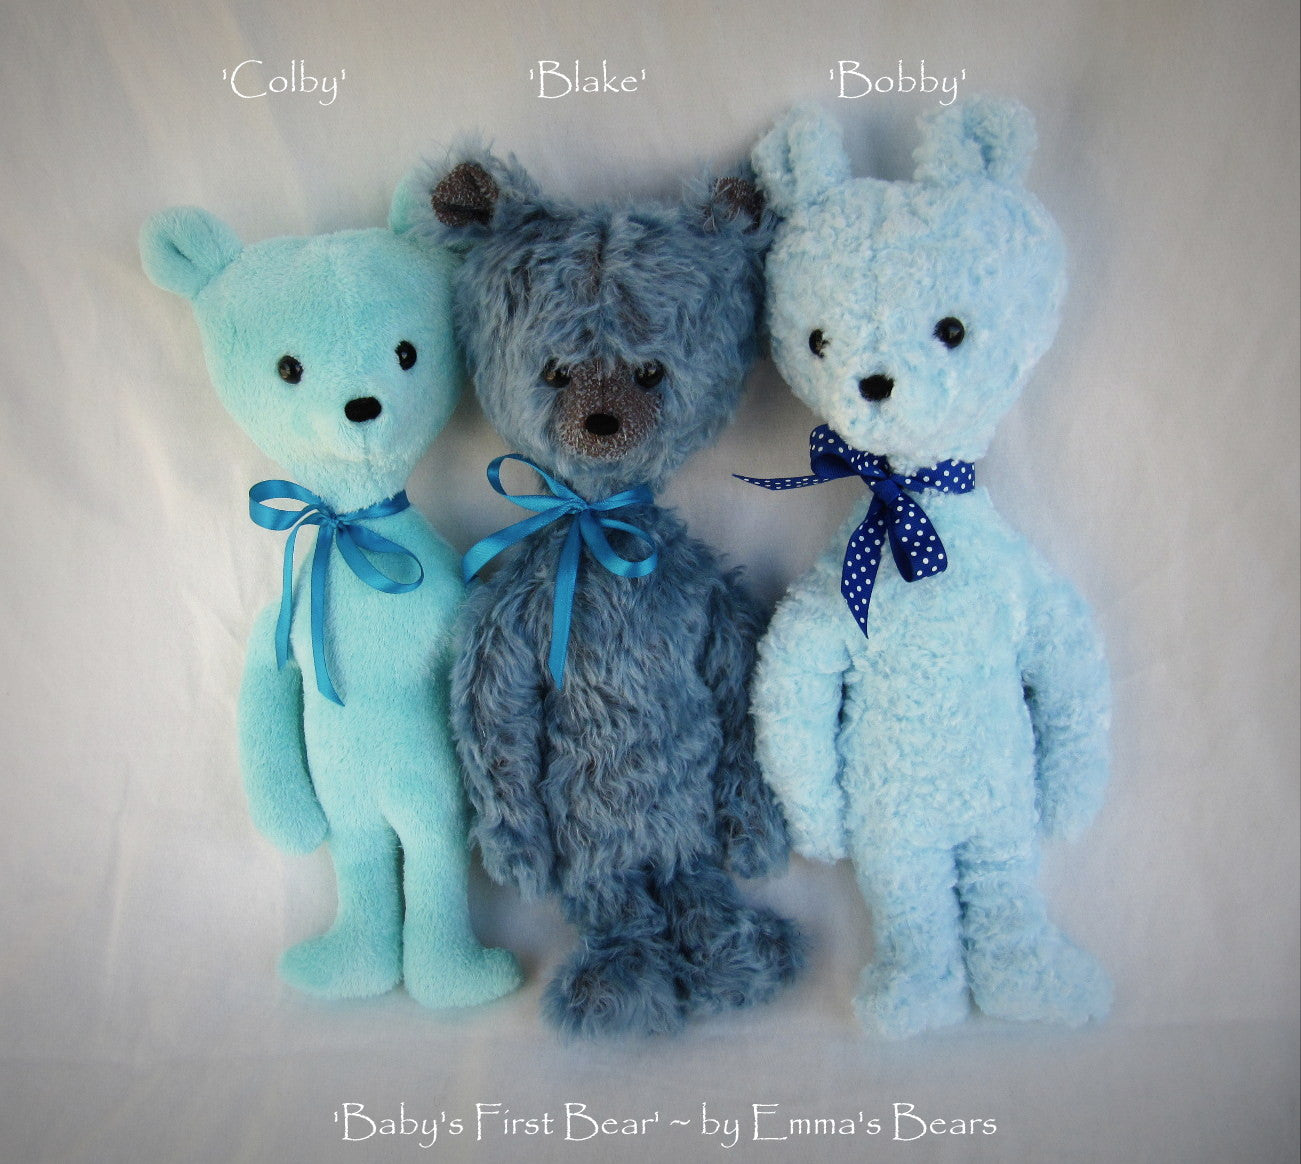 Digital PATTERN - 14" Baby's First Bear - unjointed design